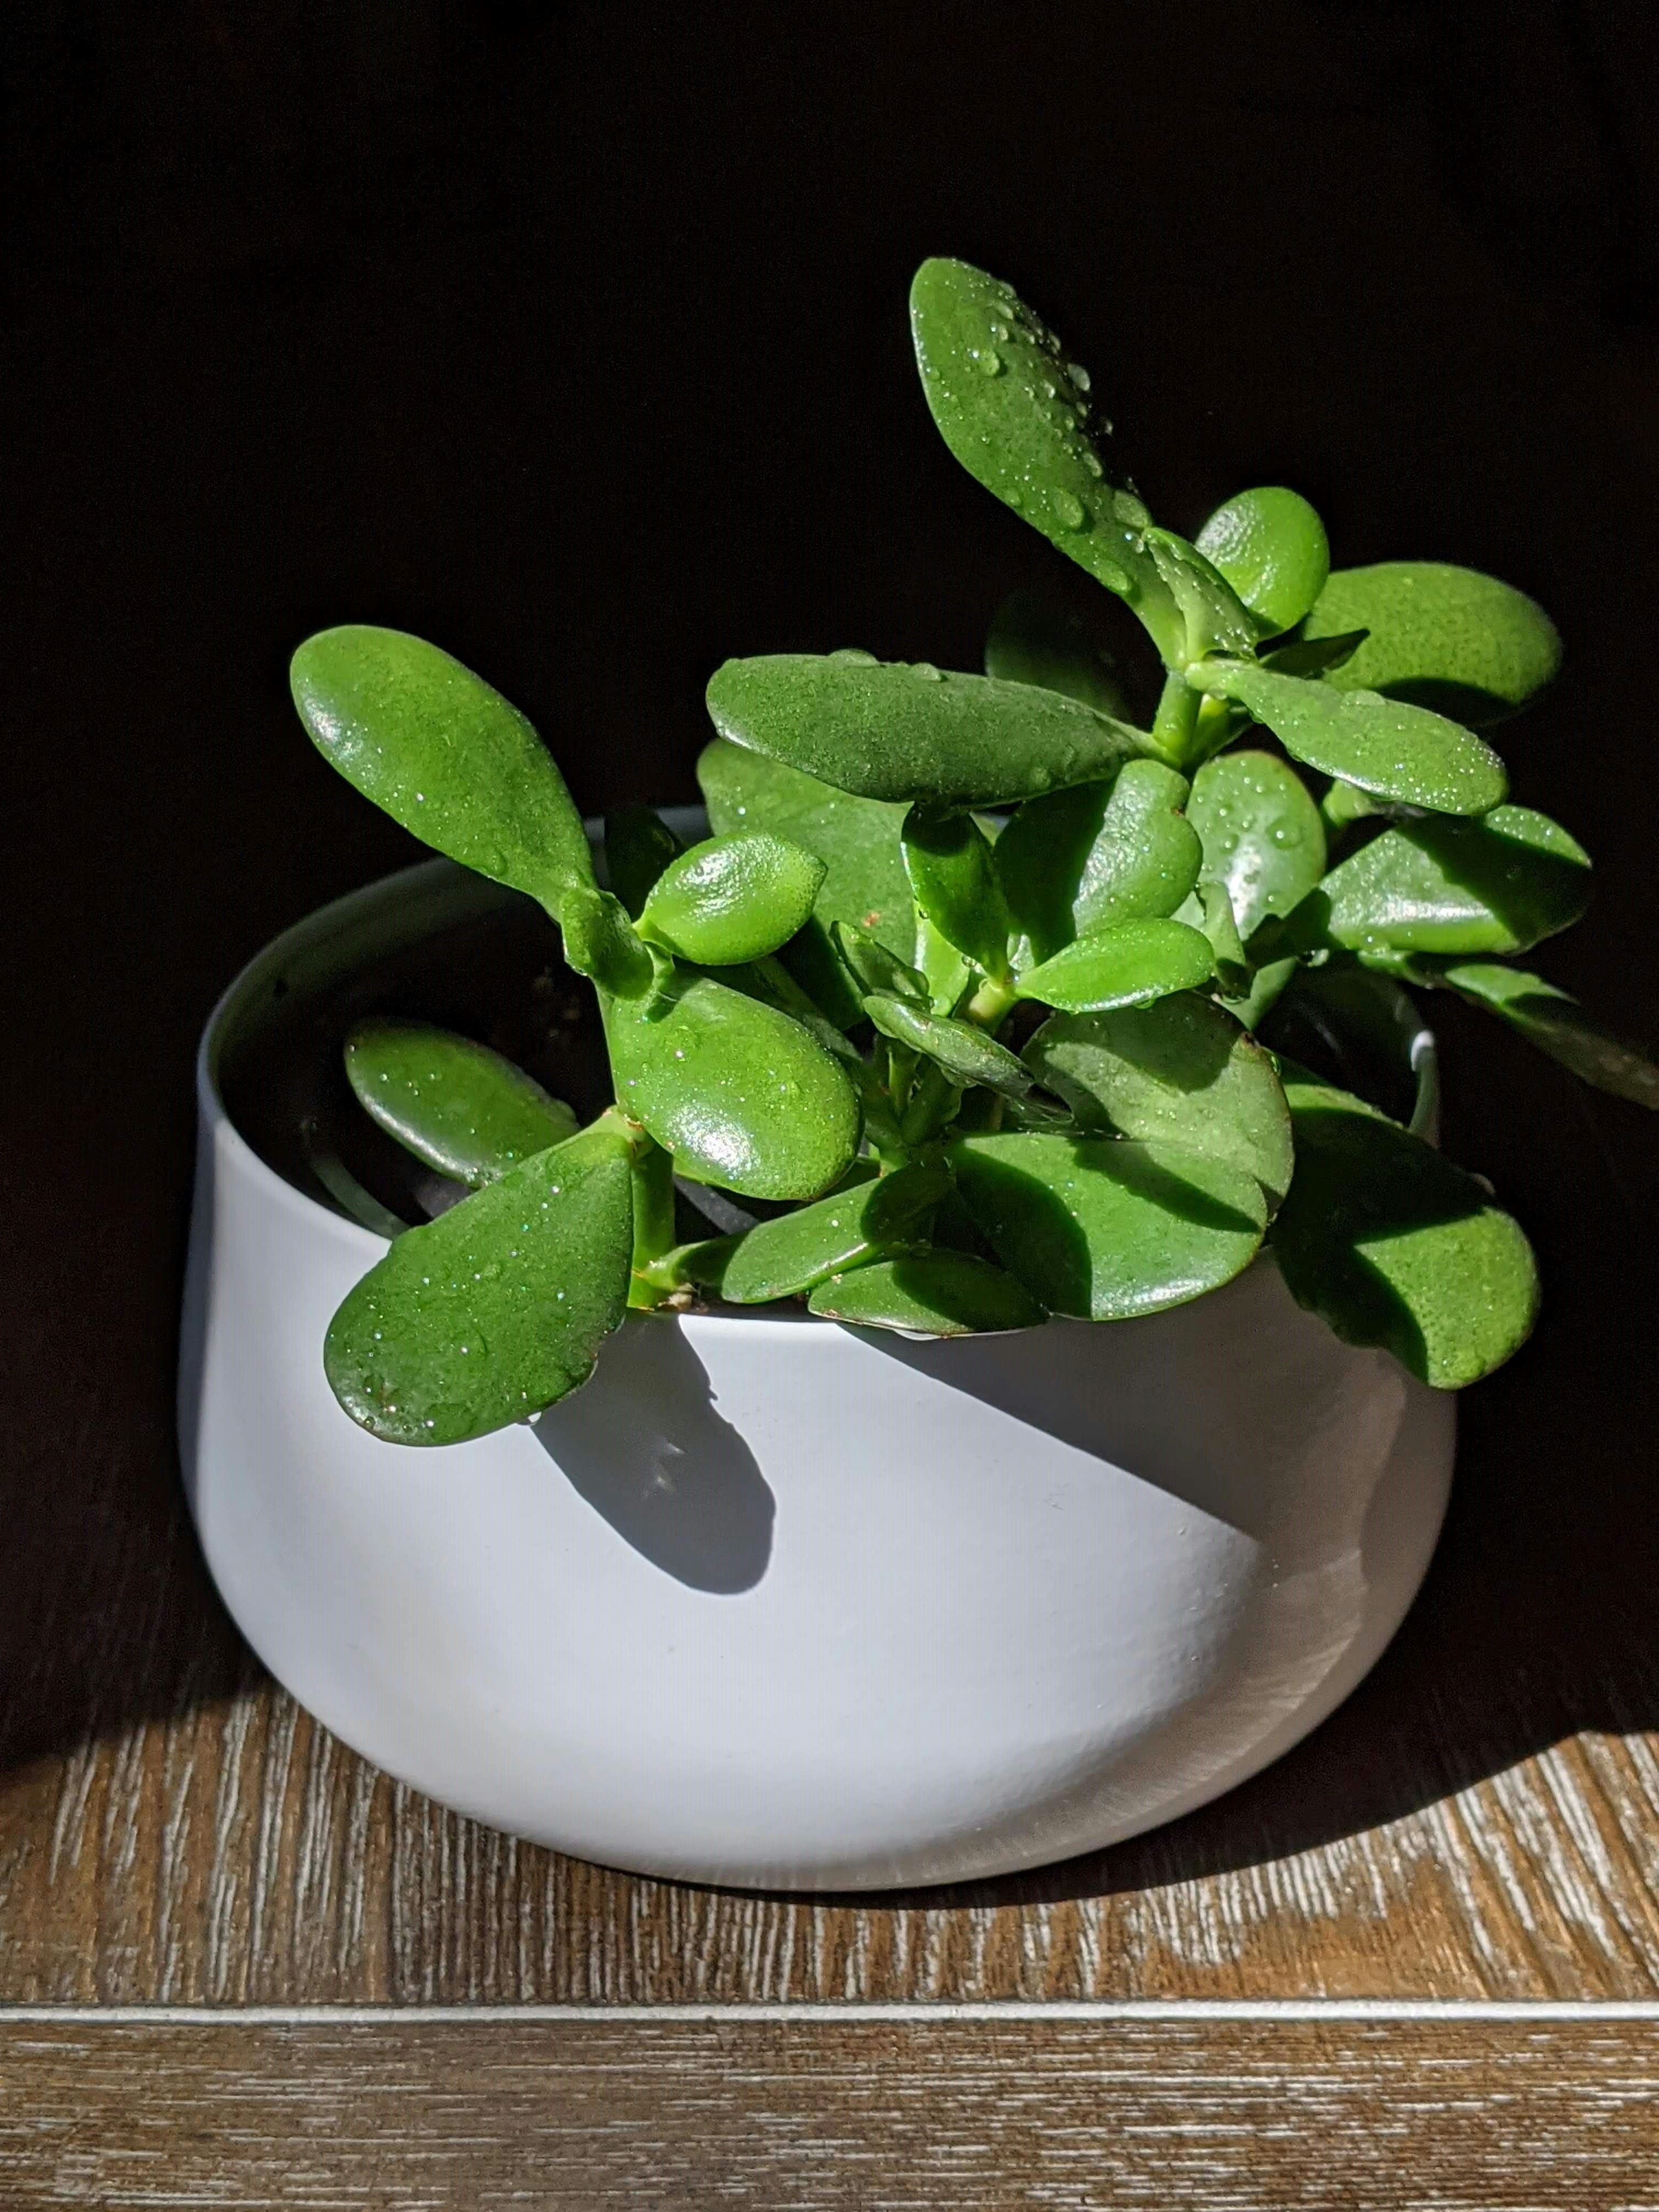 7 Spiritual Benefits to Keeping a Jade Plant at Home